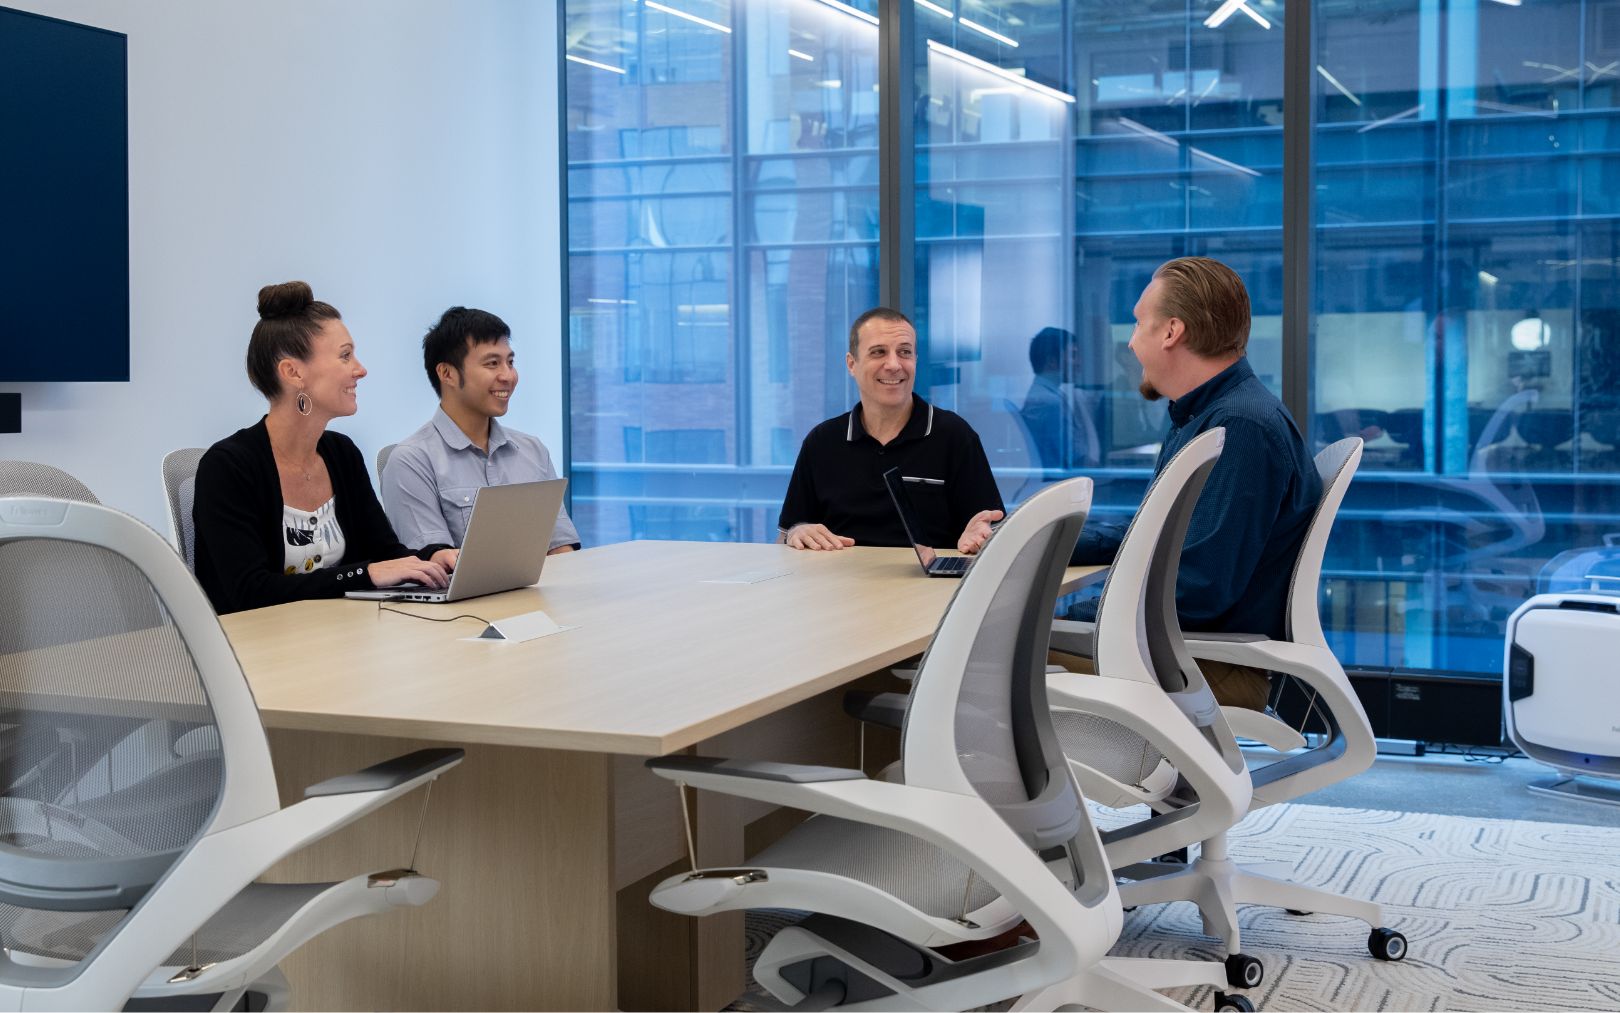 Four people sitting around a conference table talking